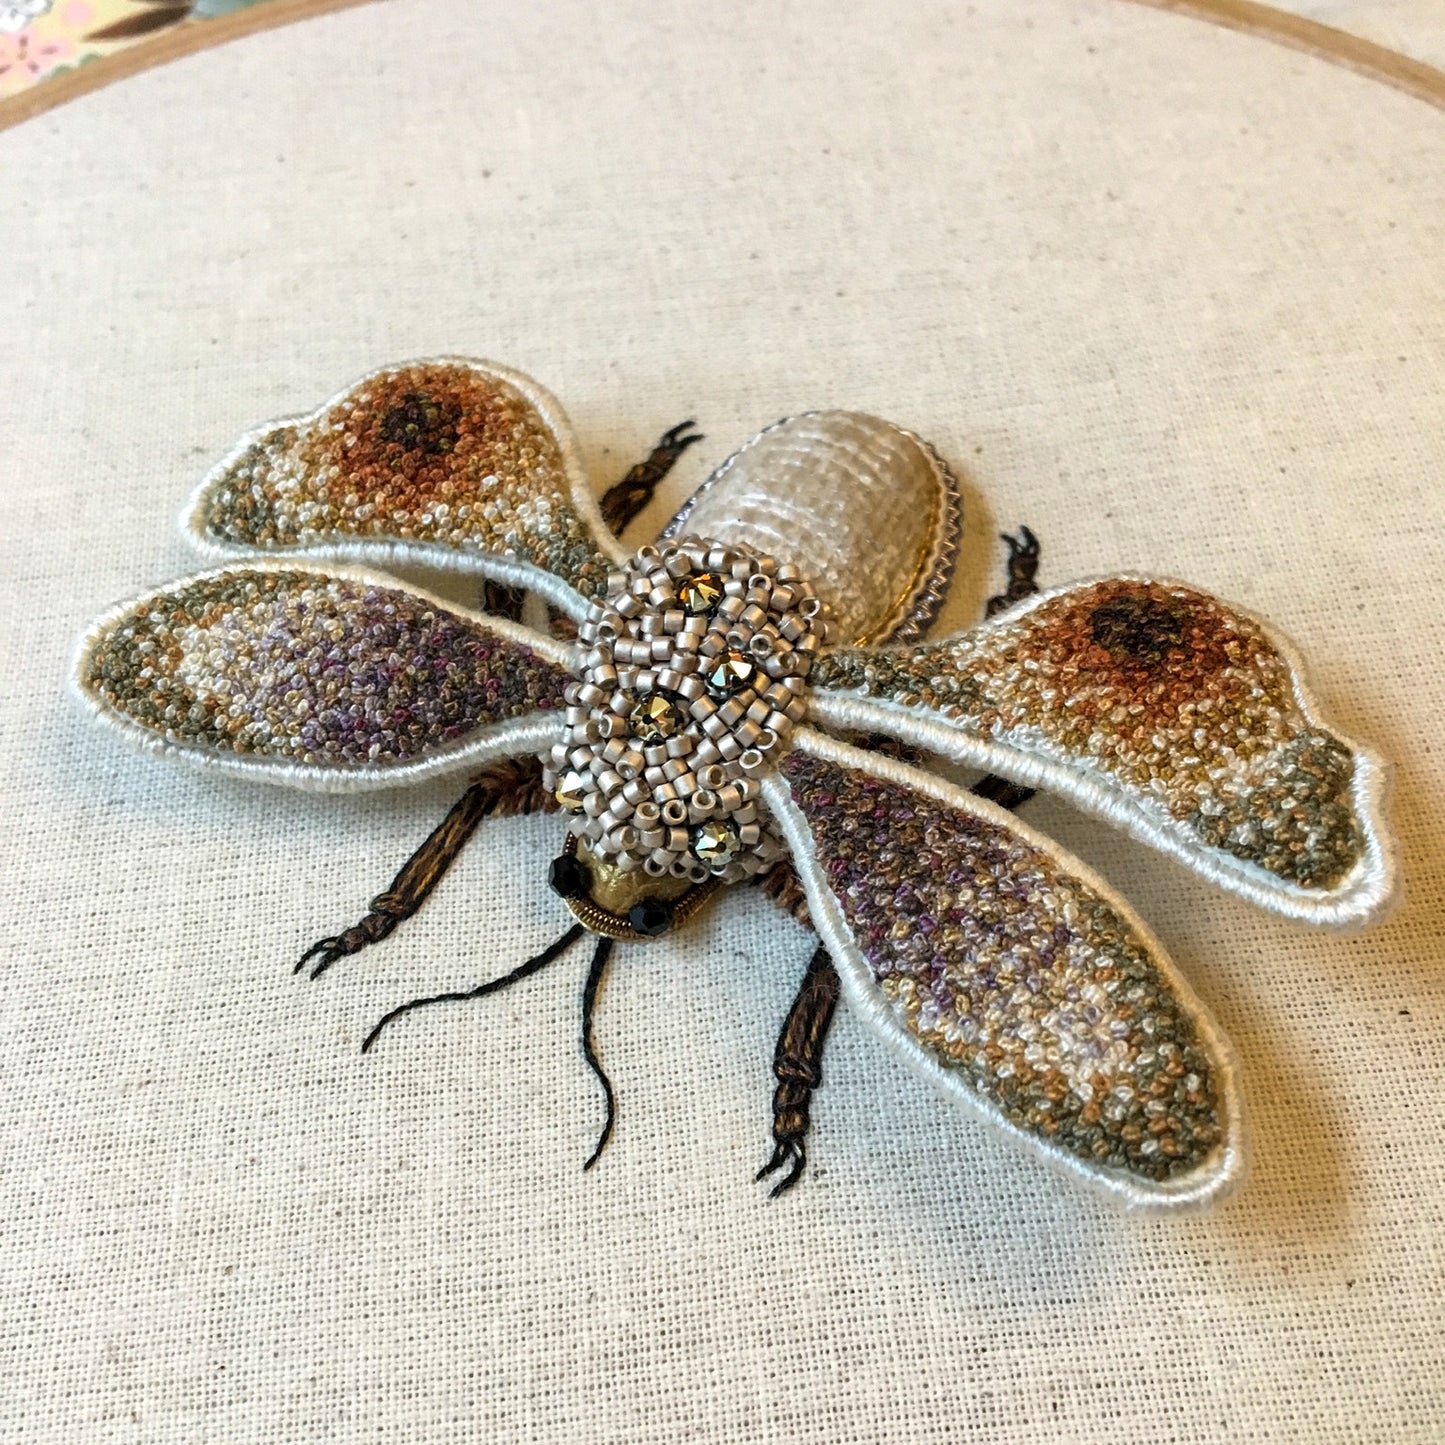 Long-horned Bee Embroidered Artwork